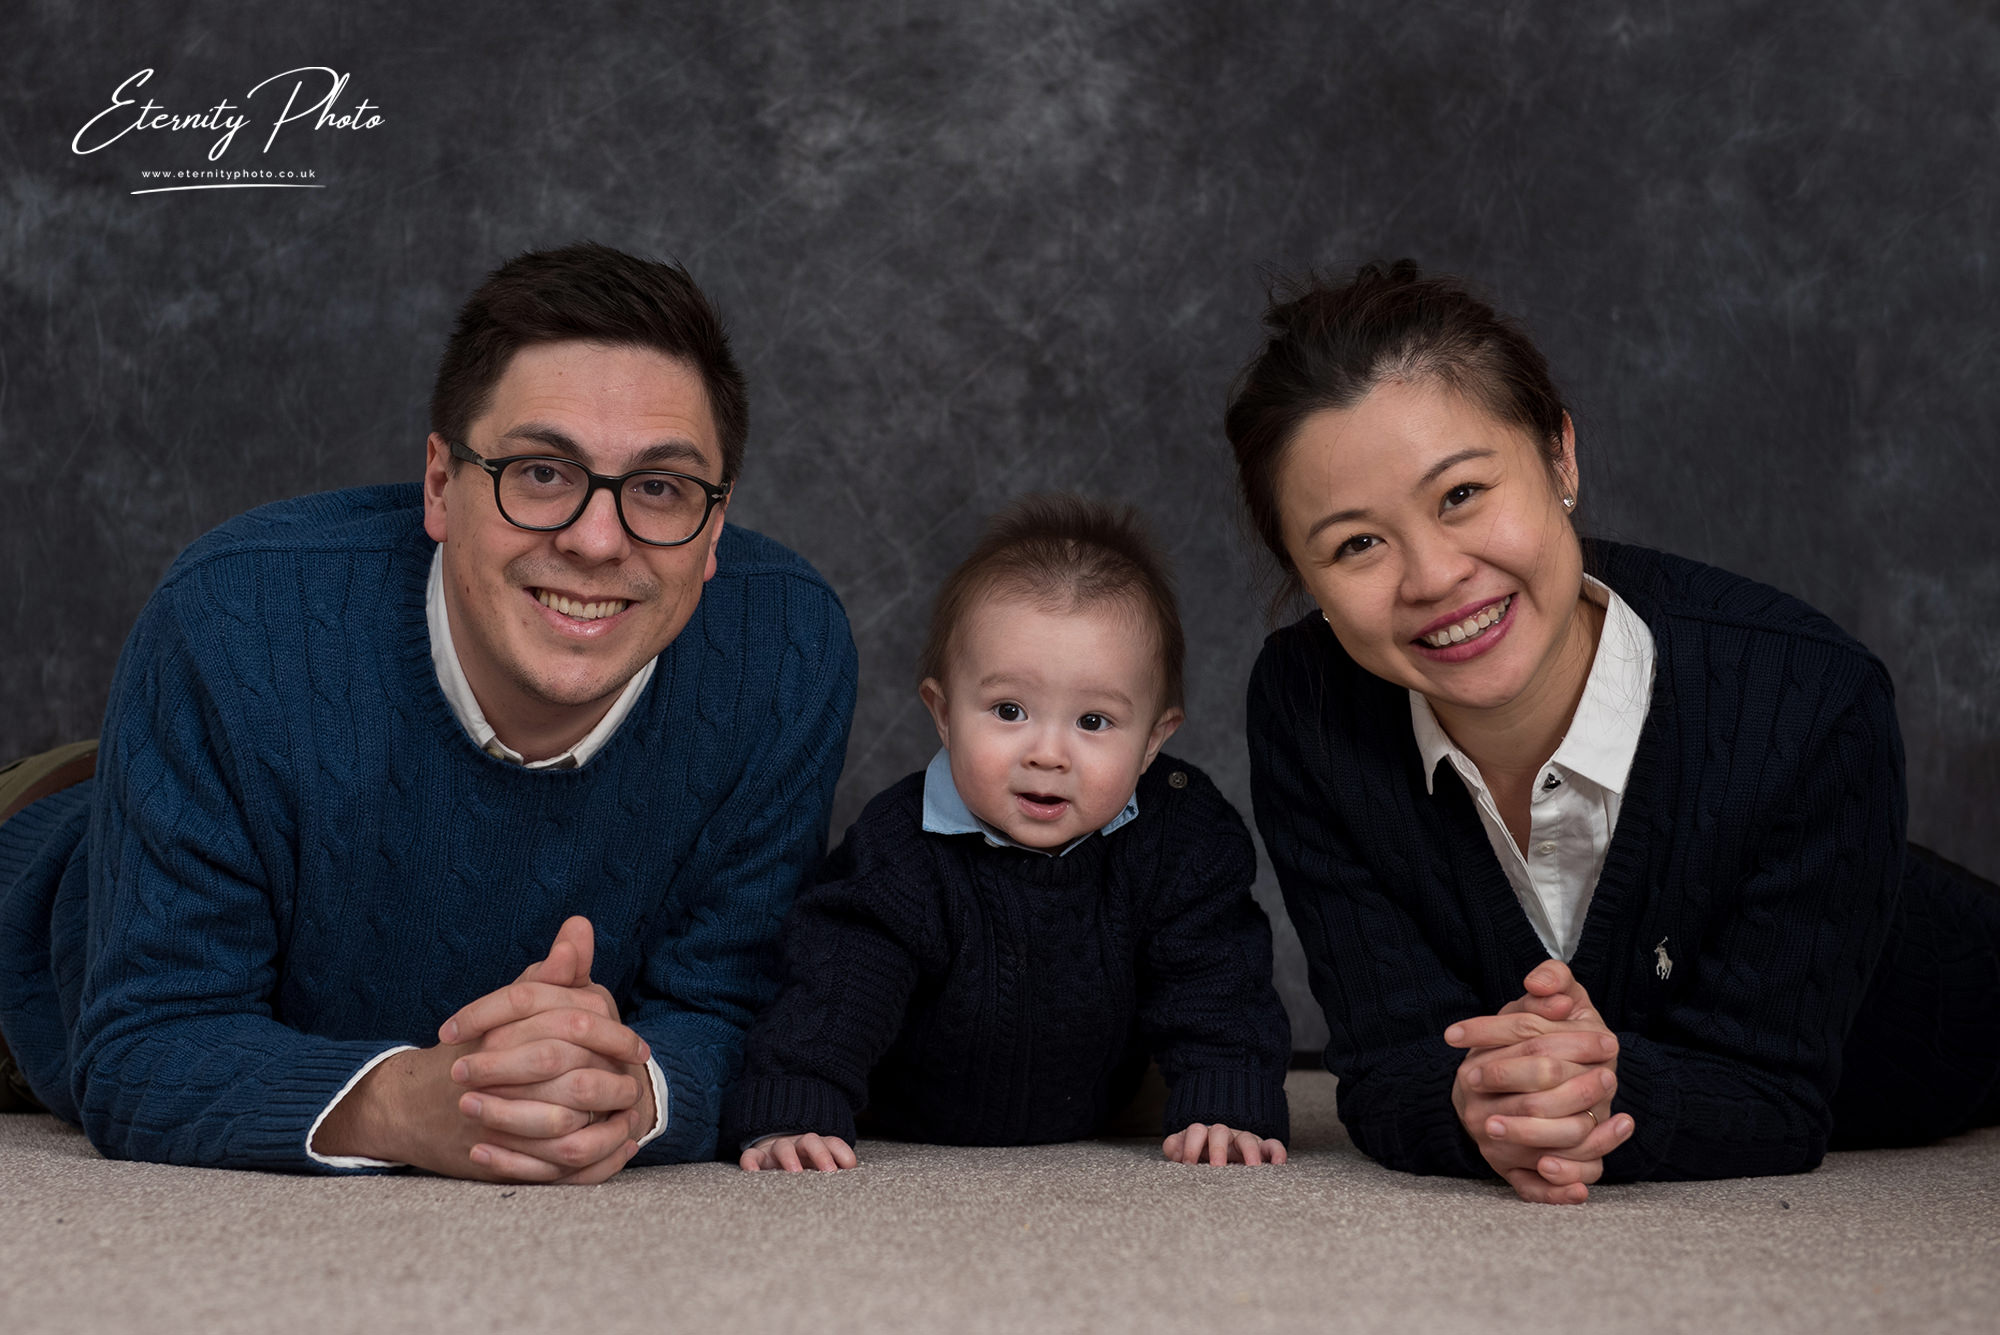 Family portrait with smiling parents and baby.